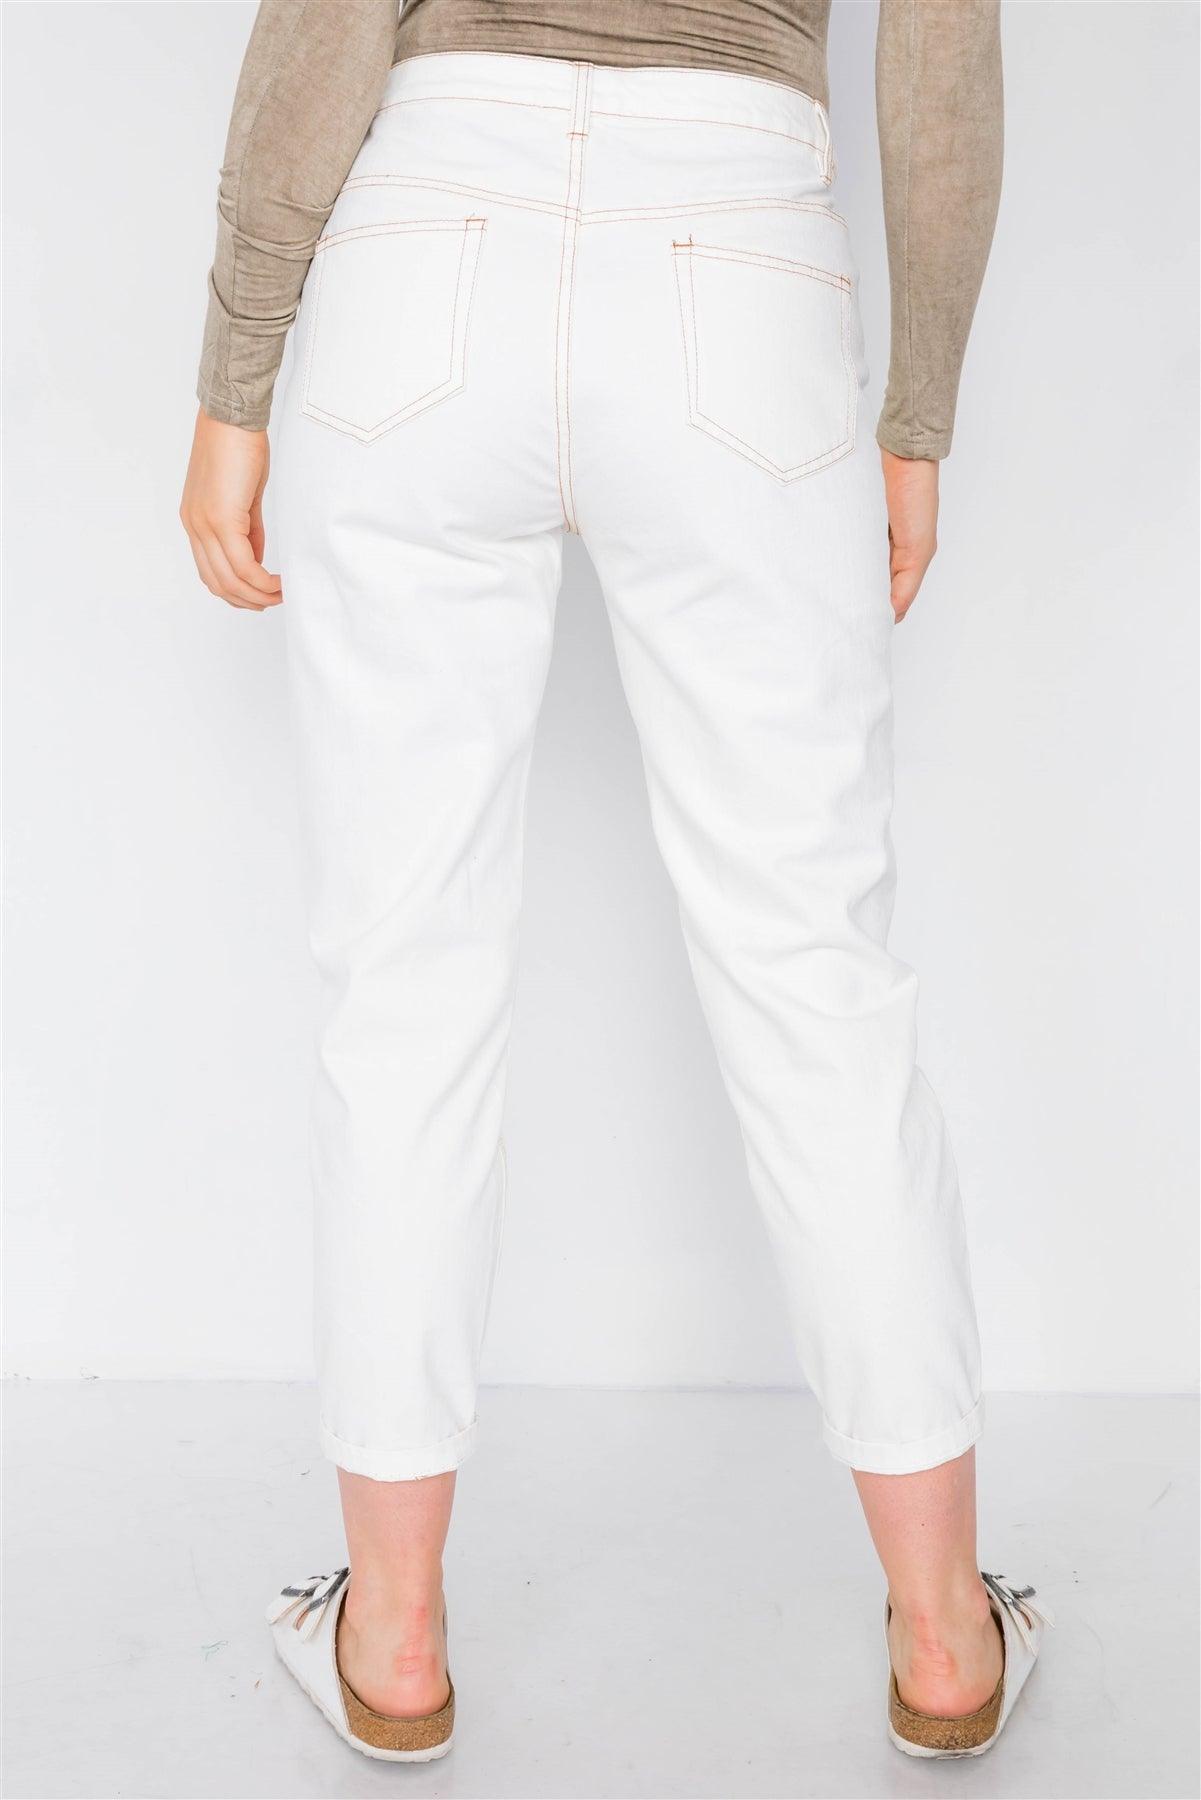 Off White Jeans With Brown Stitching  /2-2-1